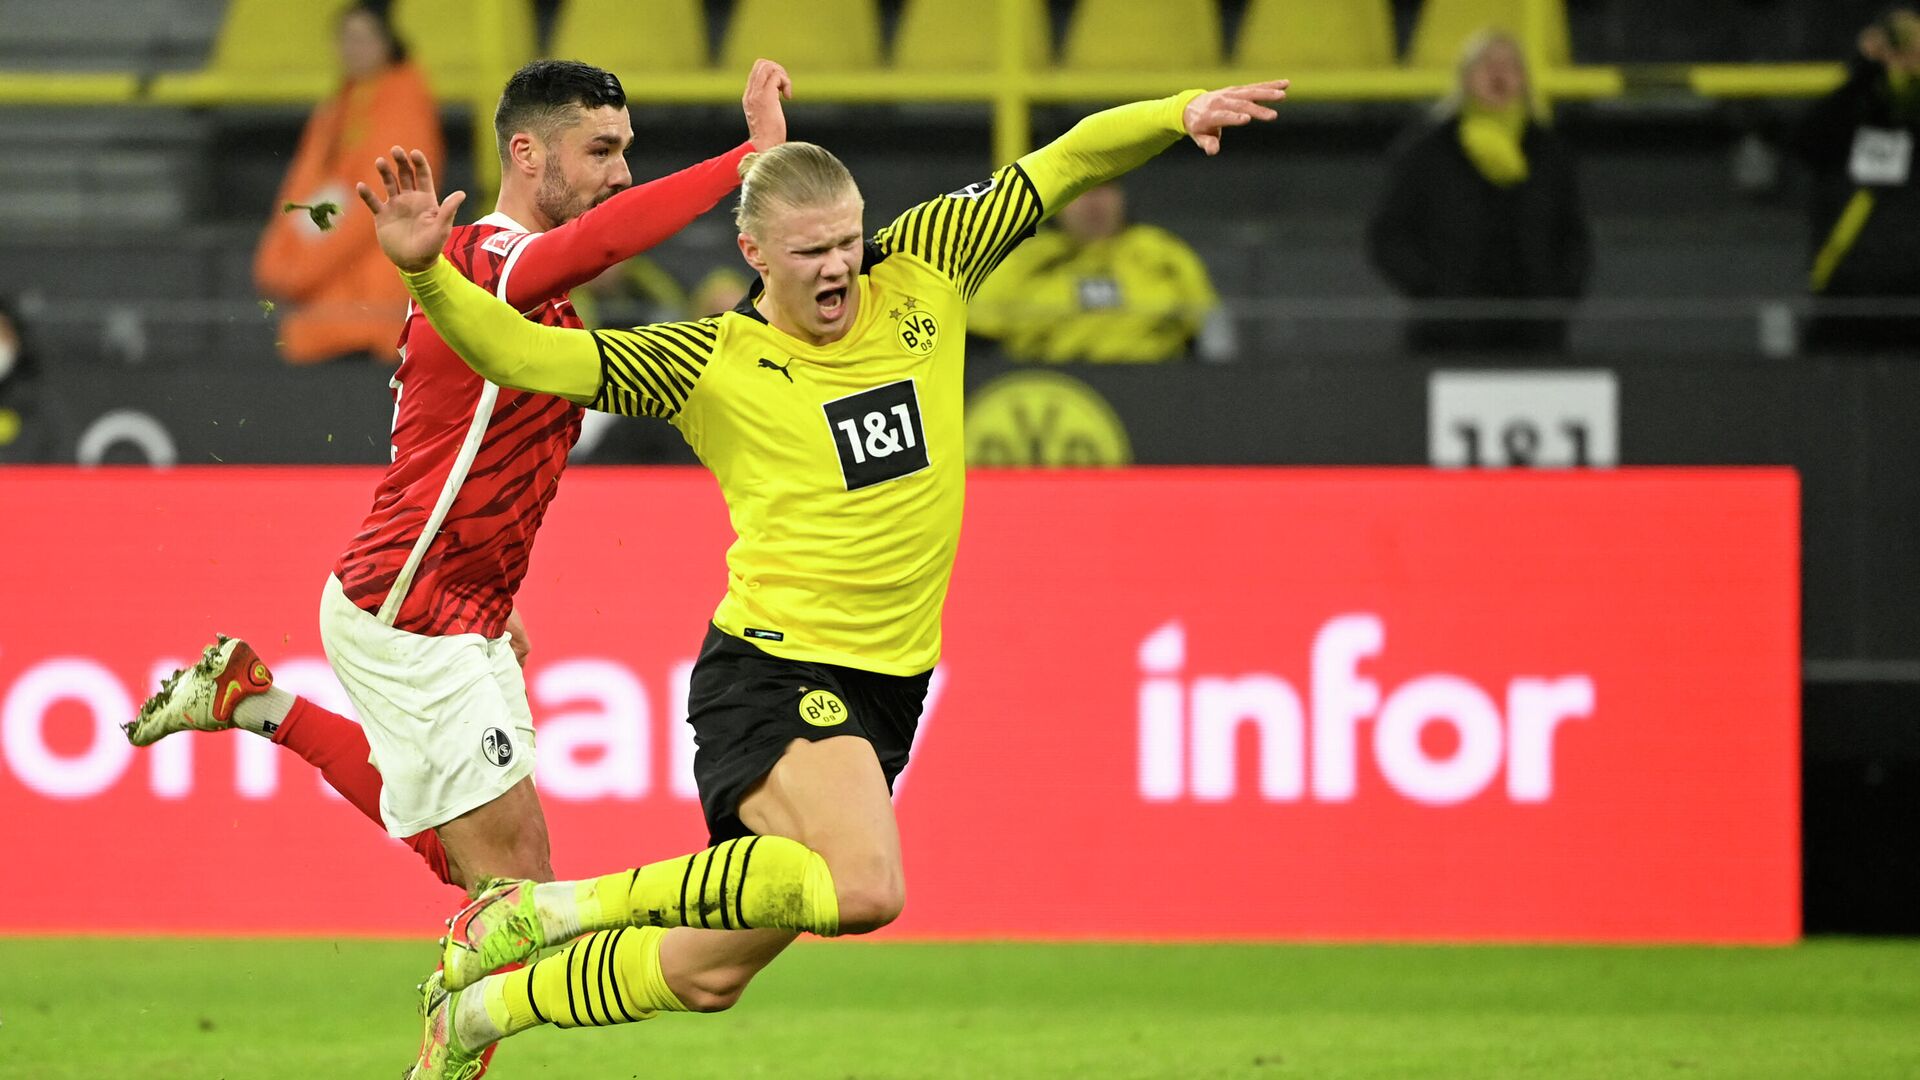 Freiburg's German defender Manuel Gulde (L) and Dortmund's Norwegian forward Erling Braut Haaland vie for the ball during the German first division Bundesliga football match between Borussia Dortmund v SC Freiburg in Dortmund, western Germany on January 14, 2022. (Photo by Ina Fassbender / AFP) / DFL REGULATIONS PROHIBIT ANY USE OF PHOTOGRAPHS AS IMAGE SEQUENCES AND/OR QUASI-VIDEO - РИА Новости, 1920, 15.01.2022